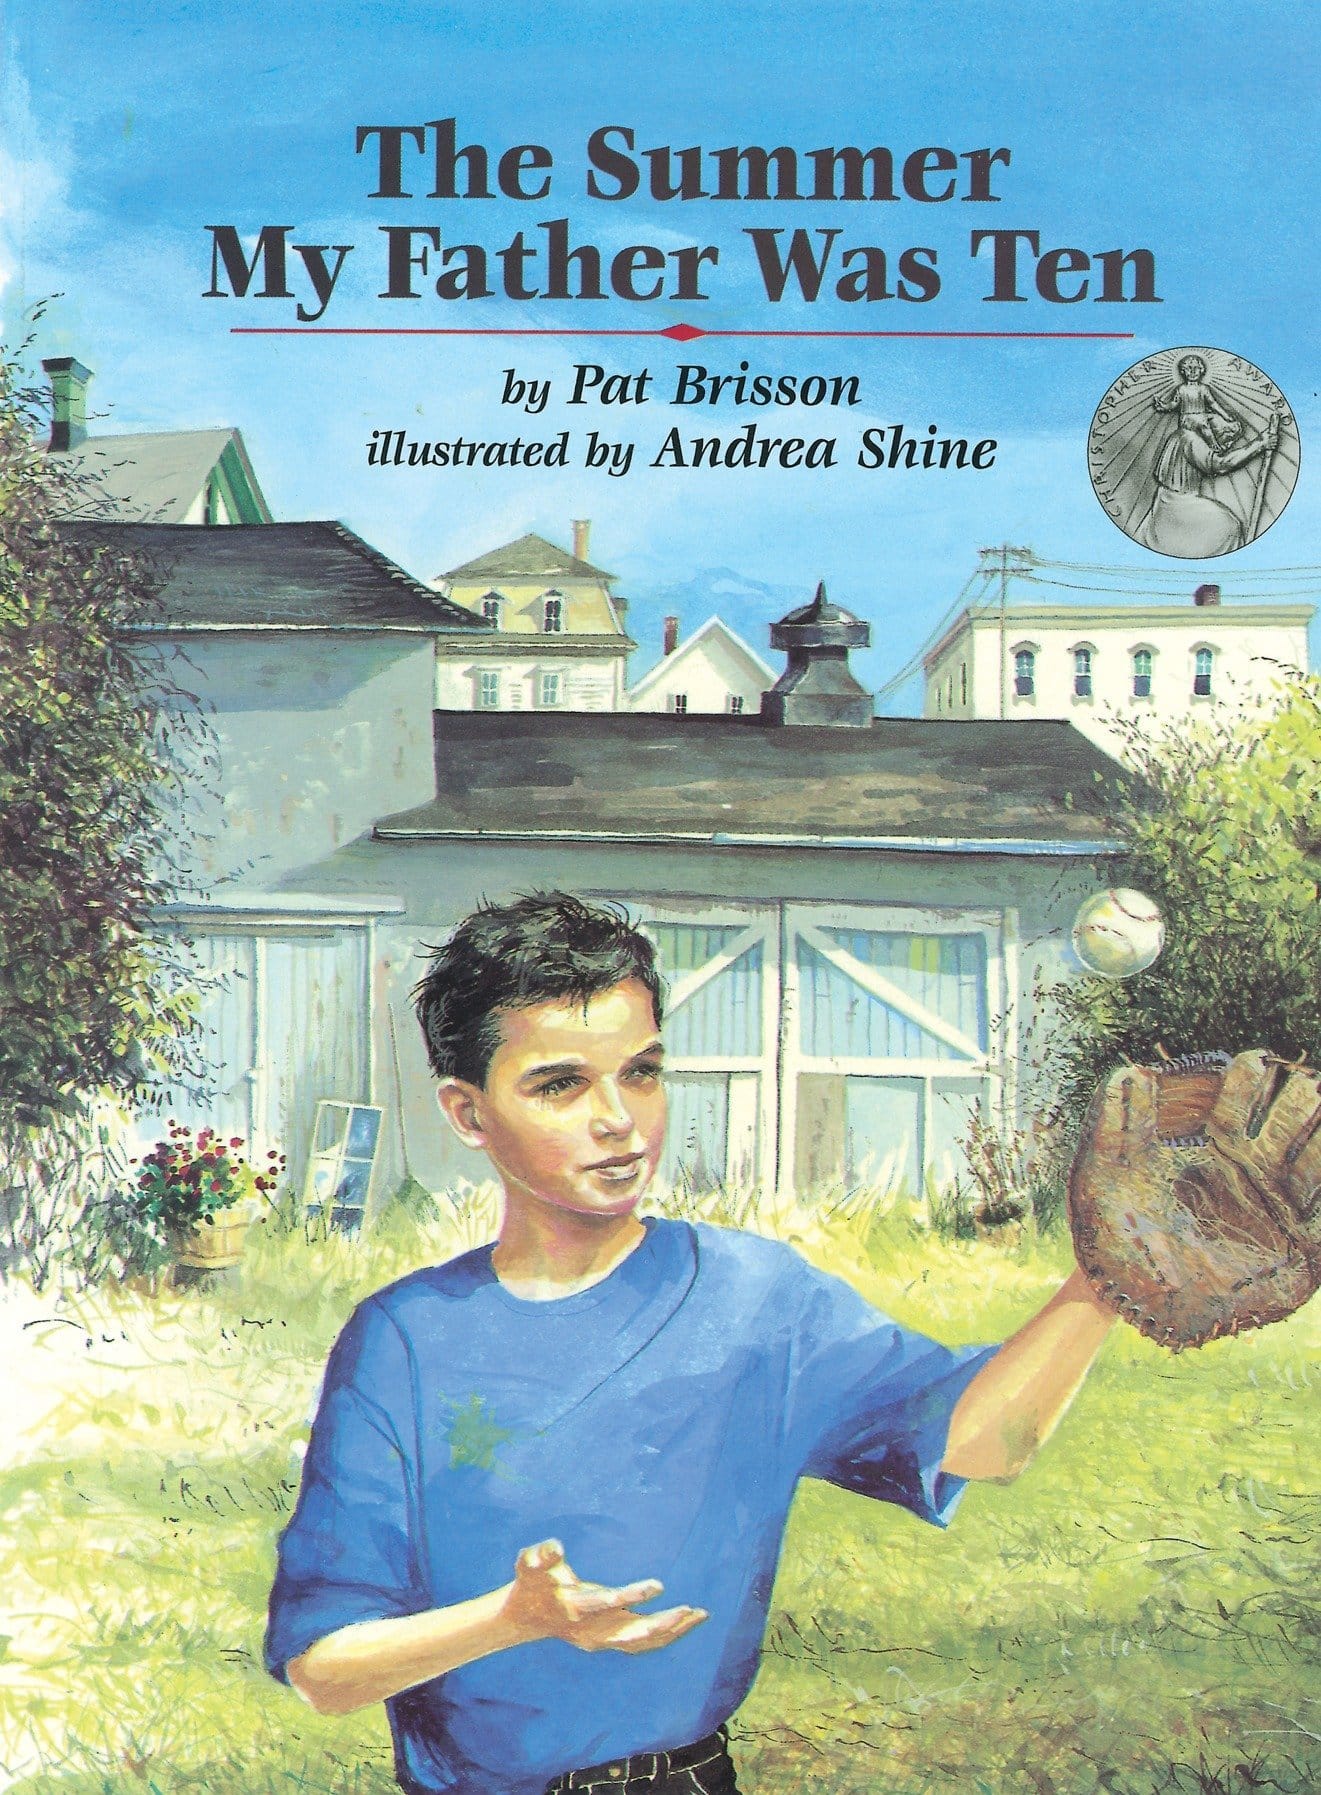 The cover for the book The Summer My Father Was Ten